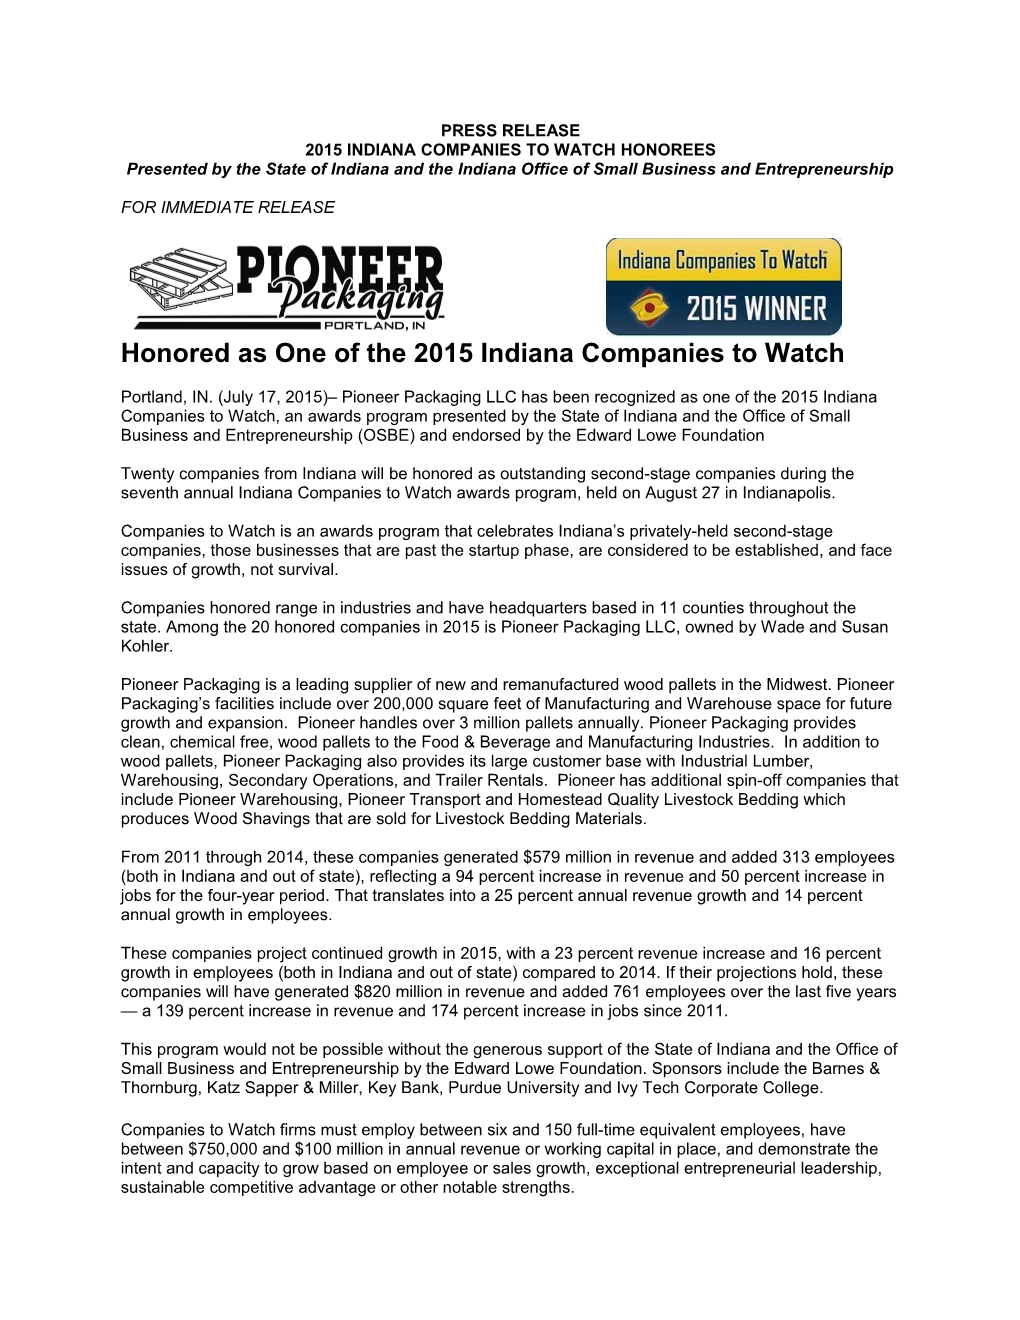 2015 Indiana Companies to Watch Honorees